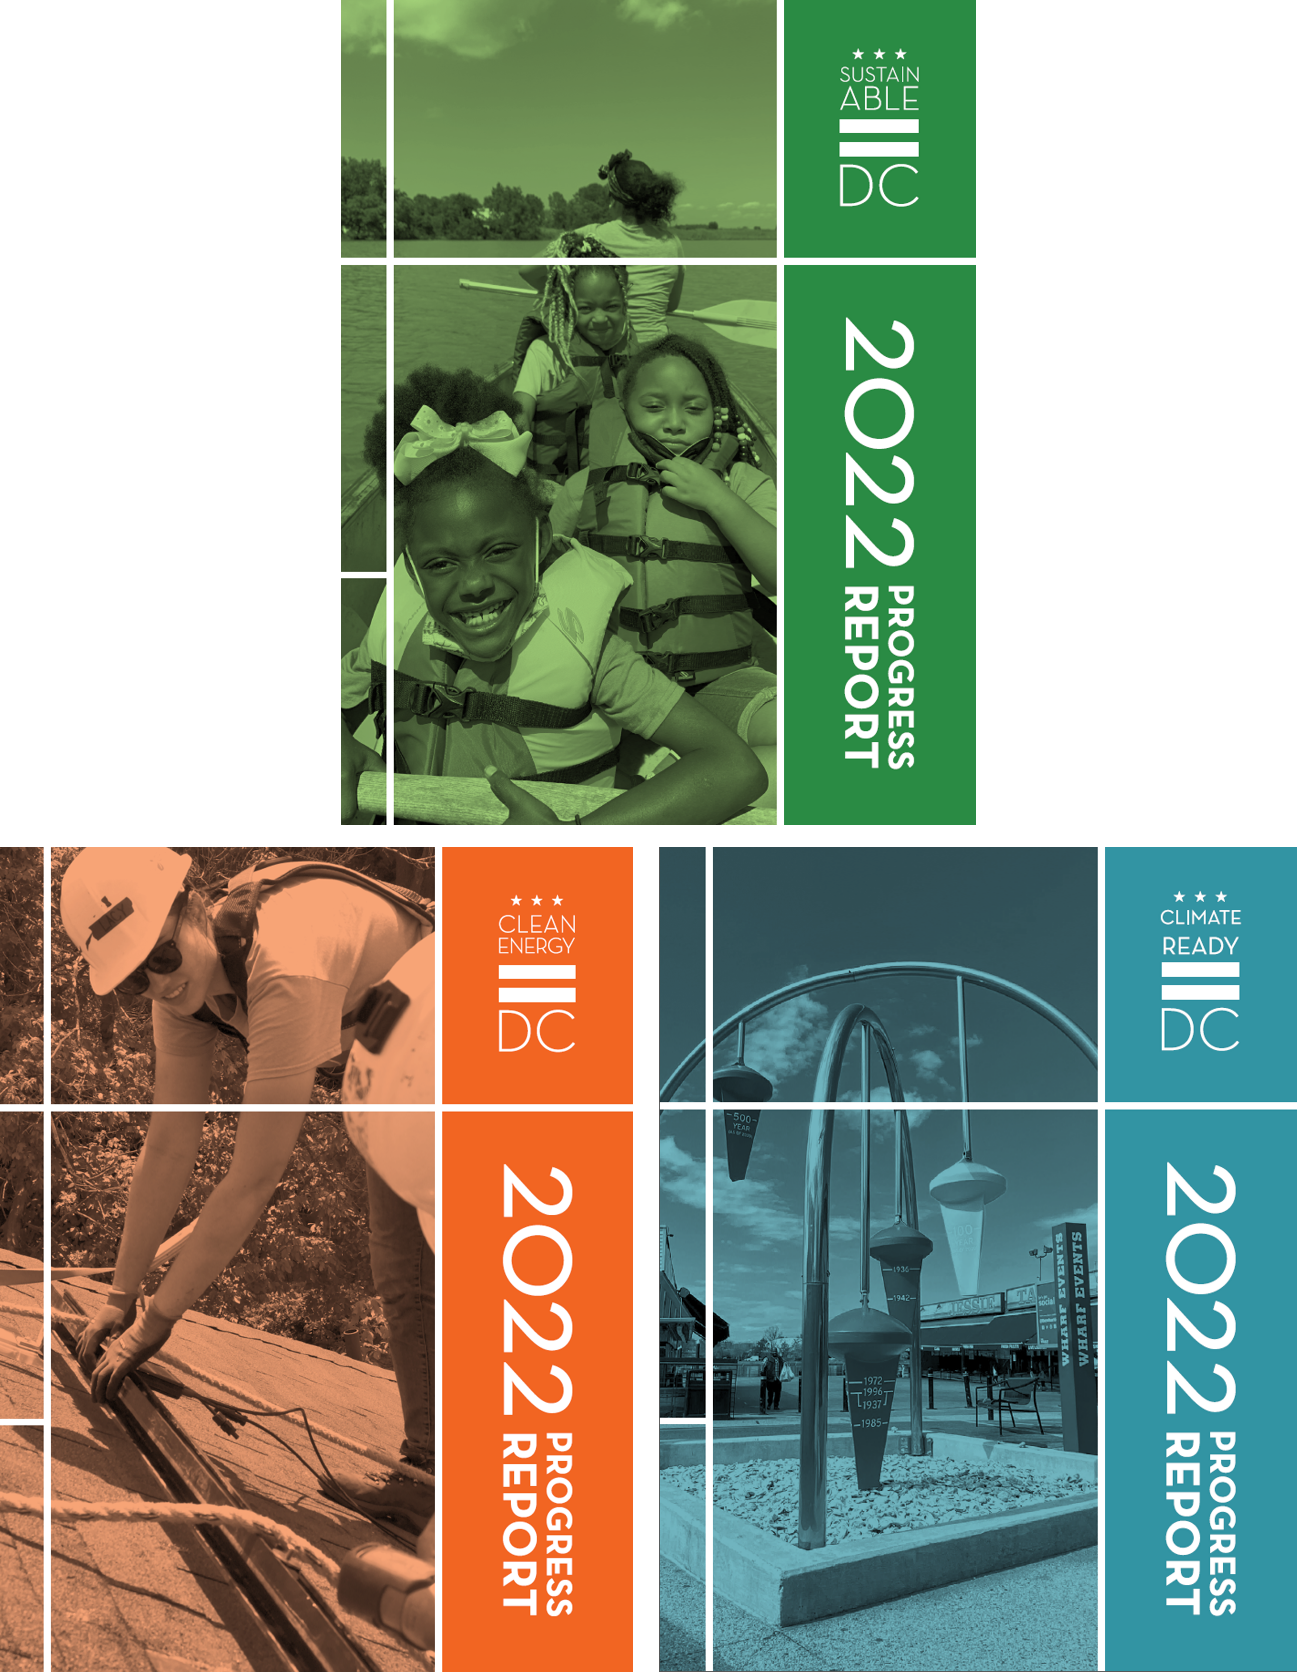 2022 Progress Report covers for Sustainable DC, Clean Energy DC, and Climate Ready DC